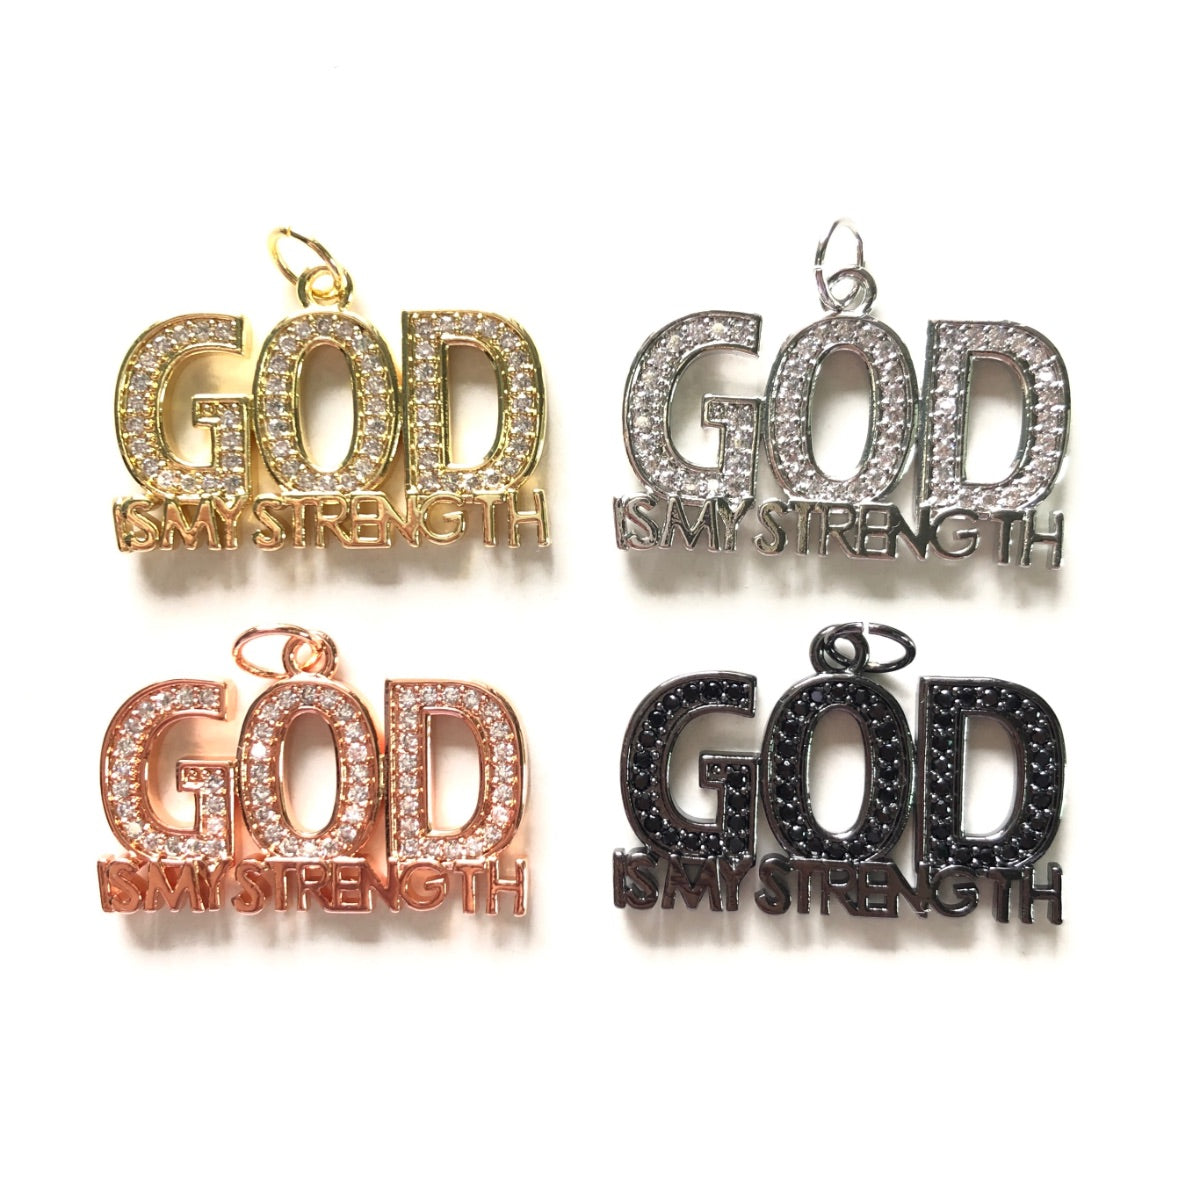 10pcs/lot CZ Paved God Is My Strength Word Charms CZ Paved Charms Christian Quotes New Charms Arrivals Charms Beads Beyond